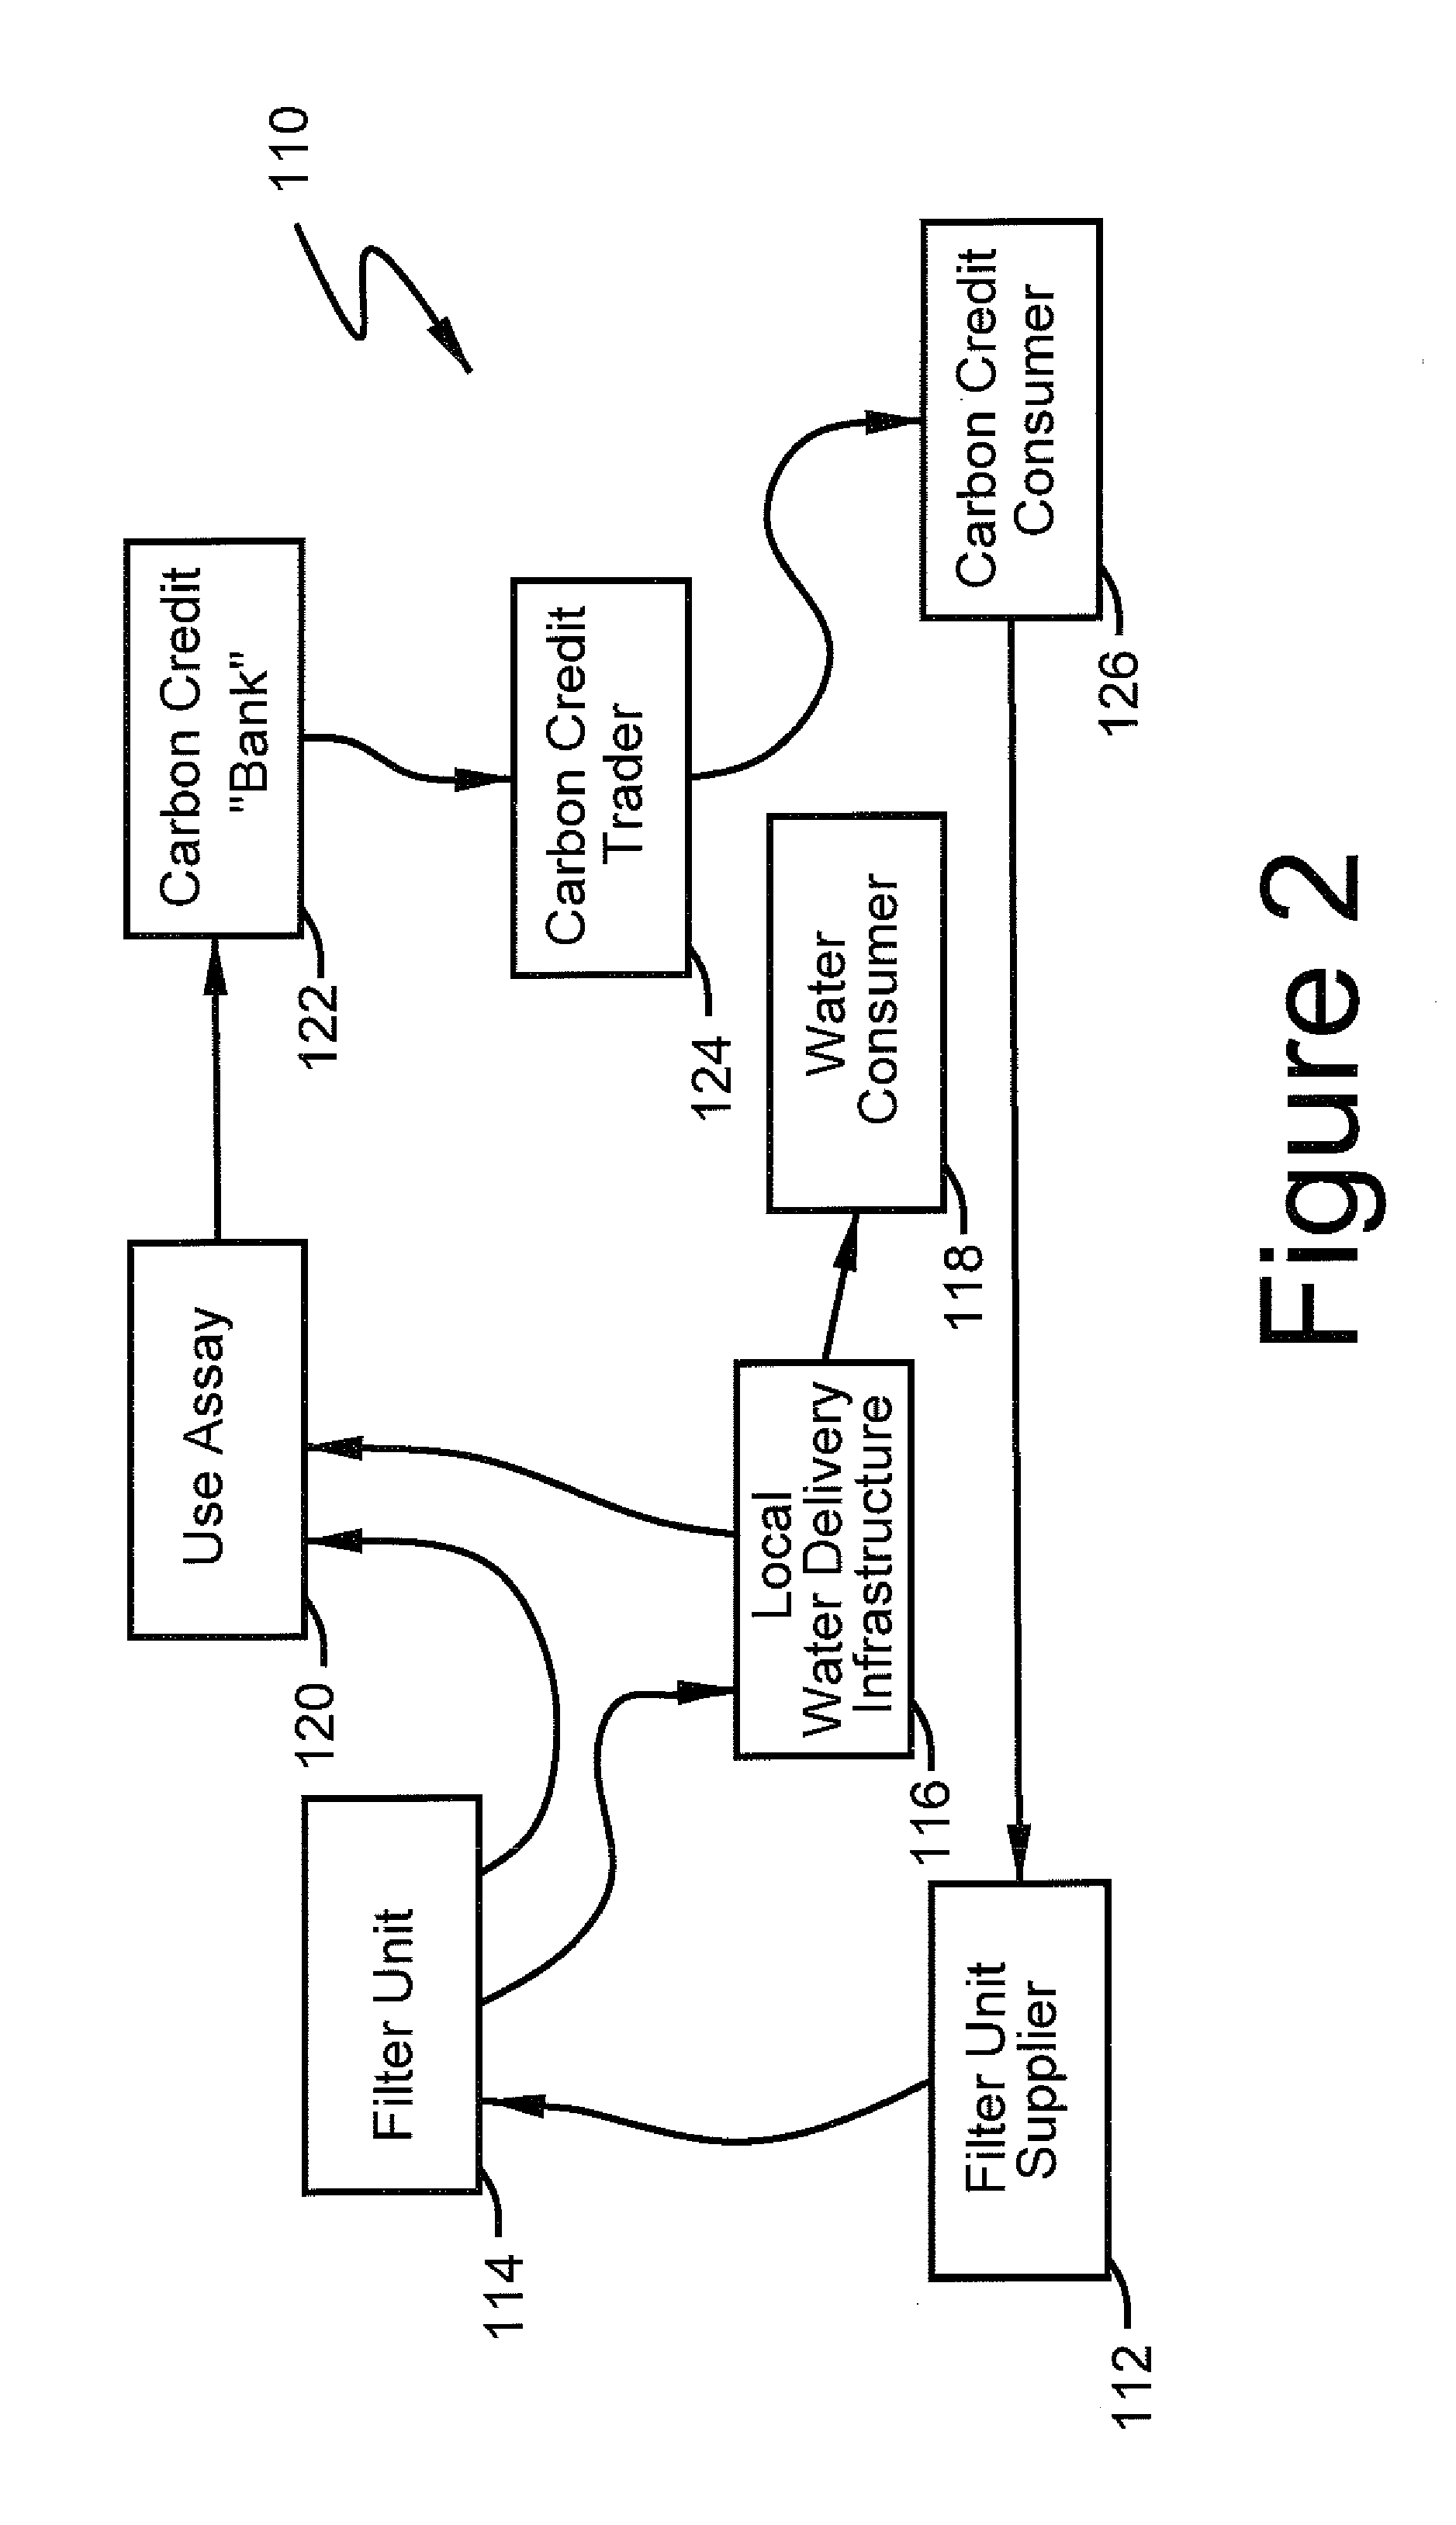 Water purification apparatus and method